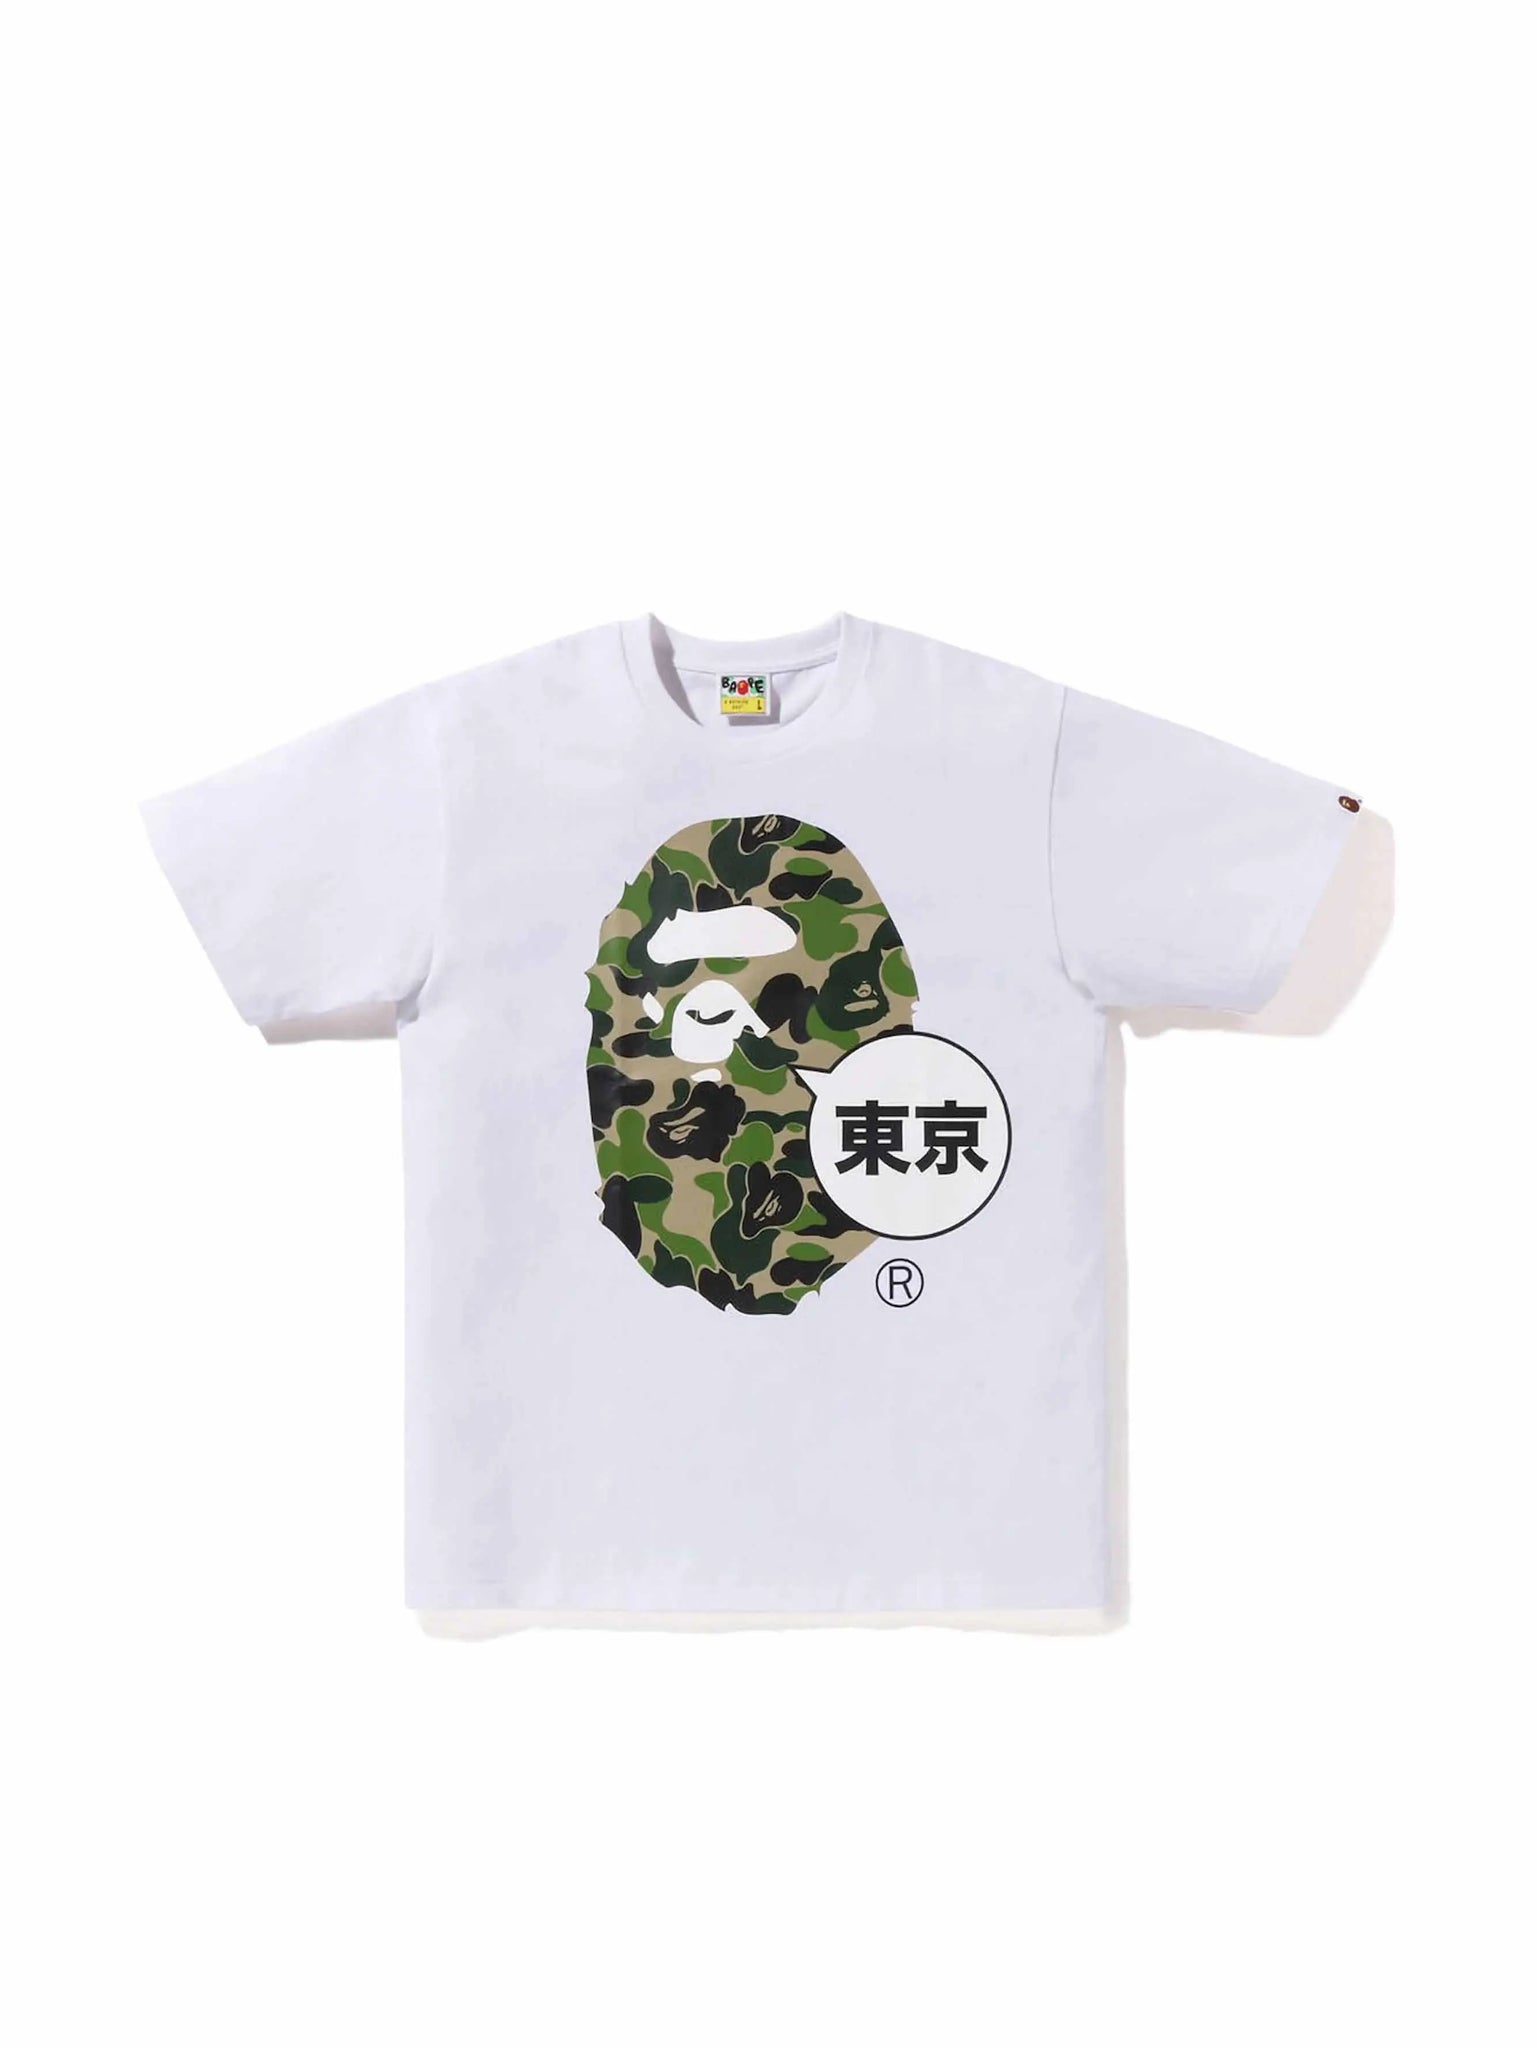 A Bathing Ape Tokyo Big Ape Head City Tee White in Auckland, New Zealand - Shop name